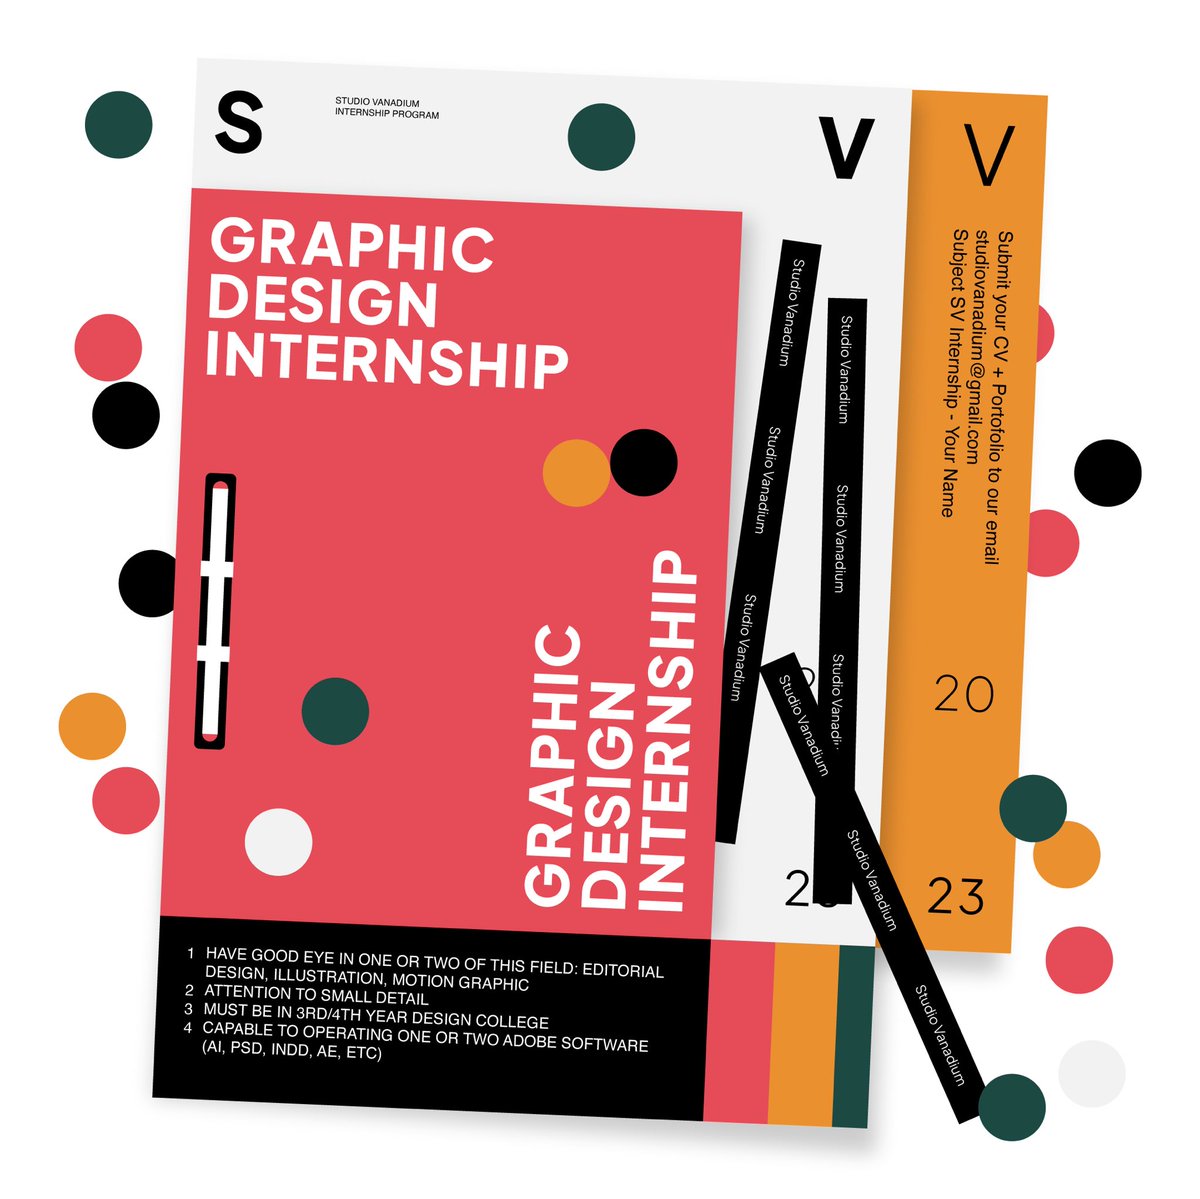 Hi! Studio Vanadium currently looking for Intern Graphic Designer to join our team.

Please submit your CV + Portofolio to our email:

Studiovanadium@gmail.com
Subject: SV Internship - (Your Name)

Thank you!